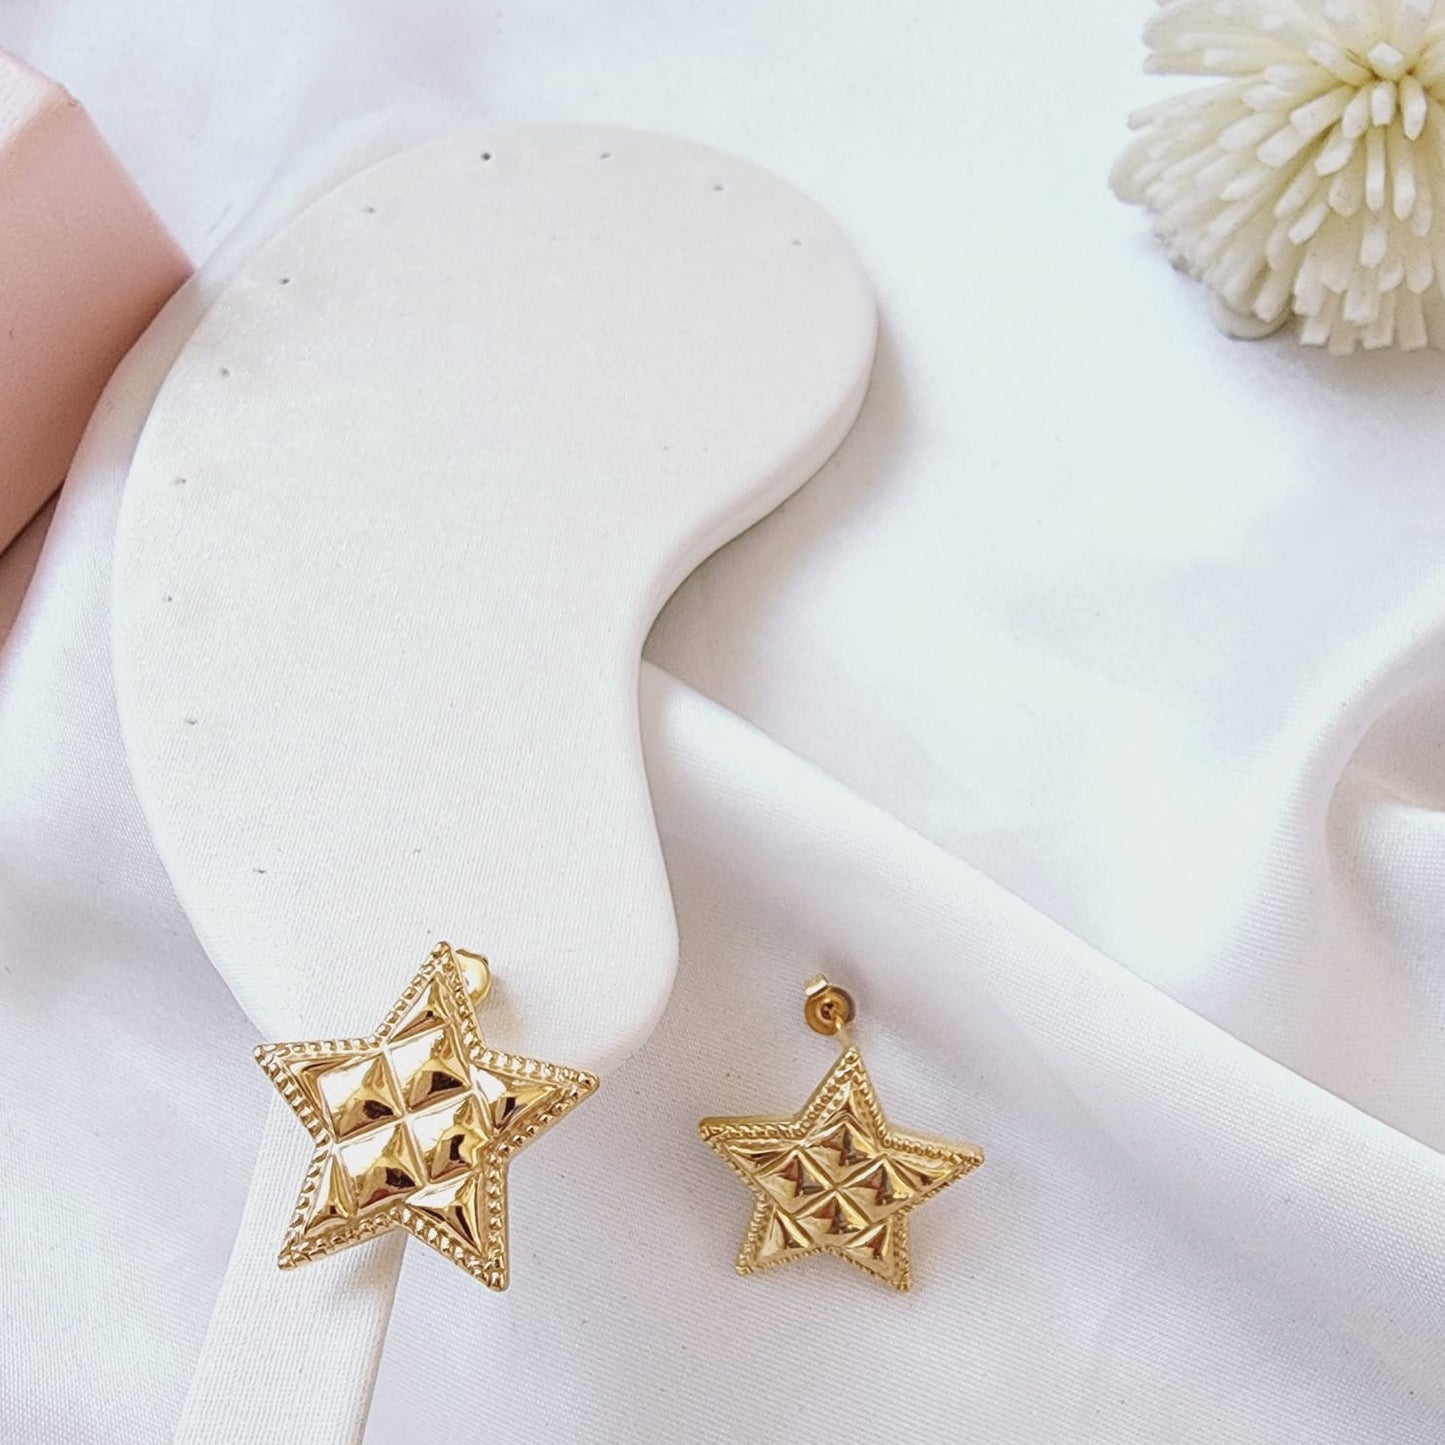 hypoallergenic earrings, Star studs, 18k gold plated earrings, Waterproof earrings, Silver and gold, Durable earrings, Elegant earrings, Timeless design, aesthetic earrings, timeless earrings, Fashion accessories, Stylish jewelry, stylish earrings, Versatile jewelry,  Special occasion jewelry, Everyday earrings, Premium quality studs, Affordable luxury Hypoallergenic earrings waterproof earrings, water resistant earrings, silver studs, gold studs